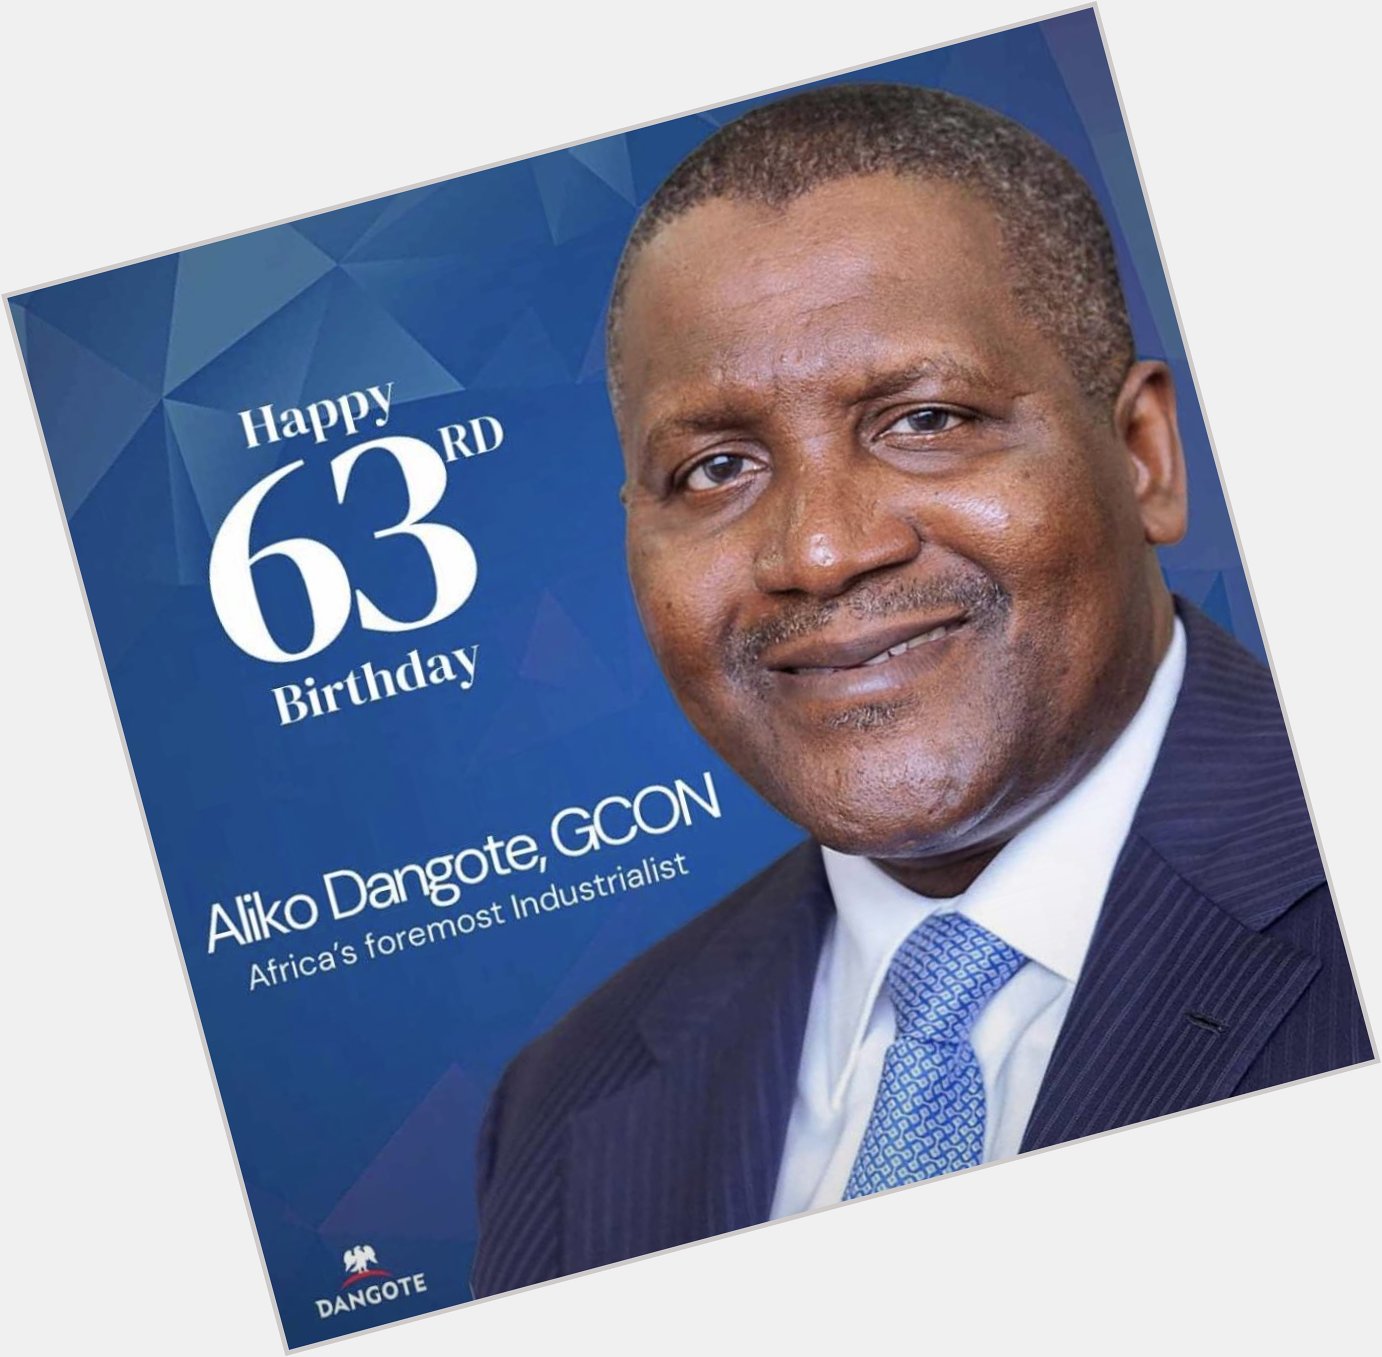 Happy birthday to Aliko Dangote, grow old in grace, happiness, fulfillment and divine health...    